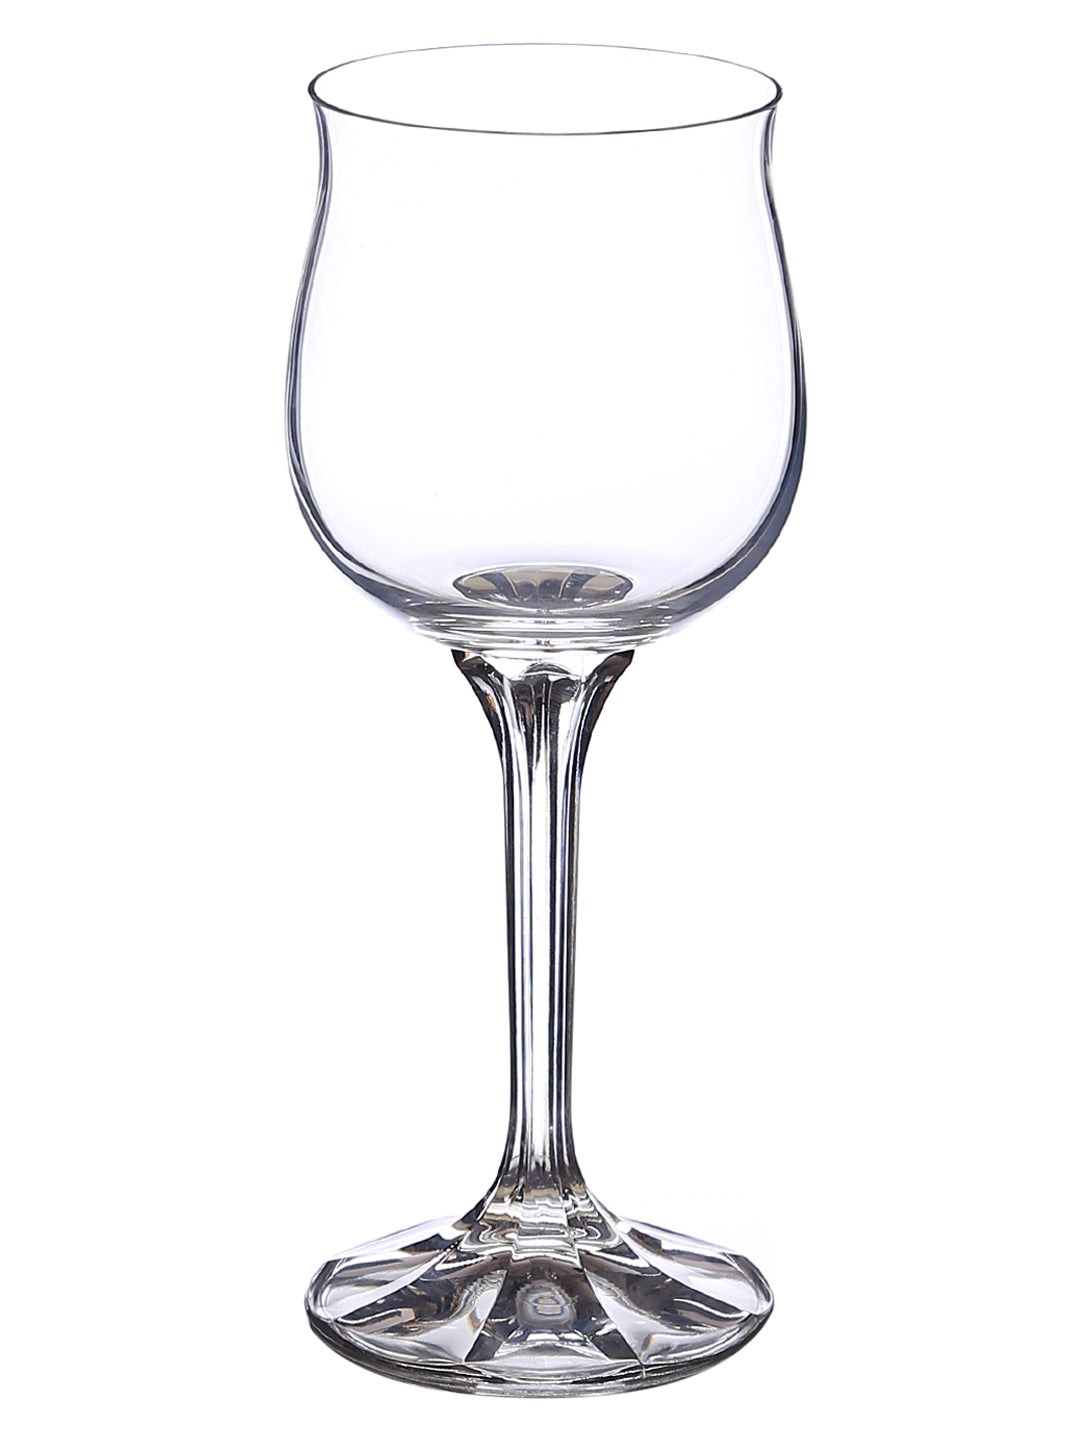 Versatile wine glass for red and white wines